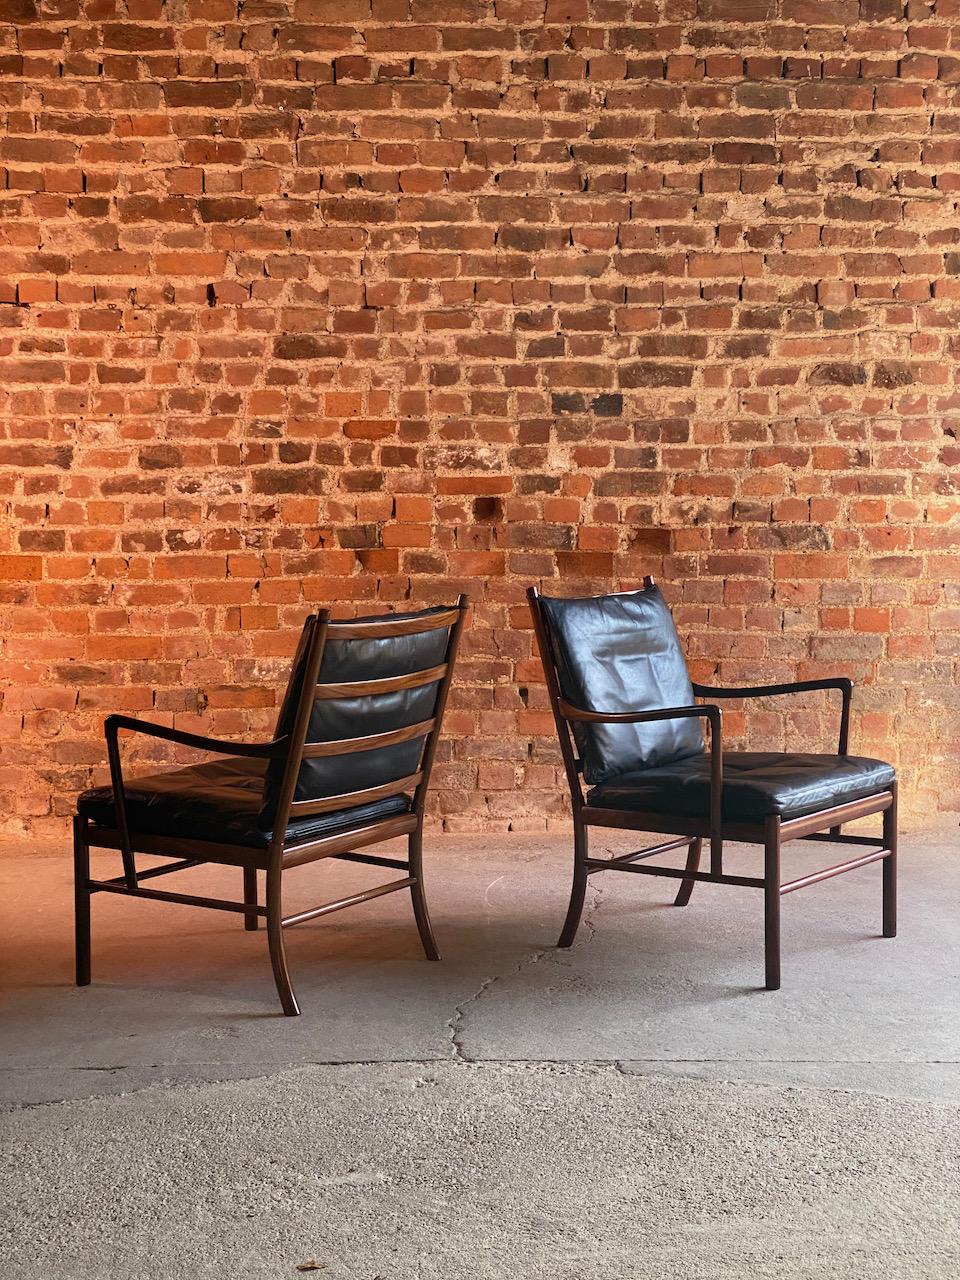 Ole Wanscher Model 149 Rosewood Colonial Chairs Pair by Poul Jeppesens, Denmark 1